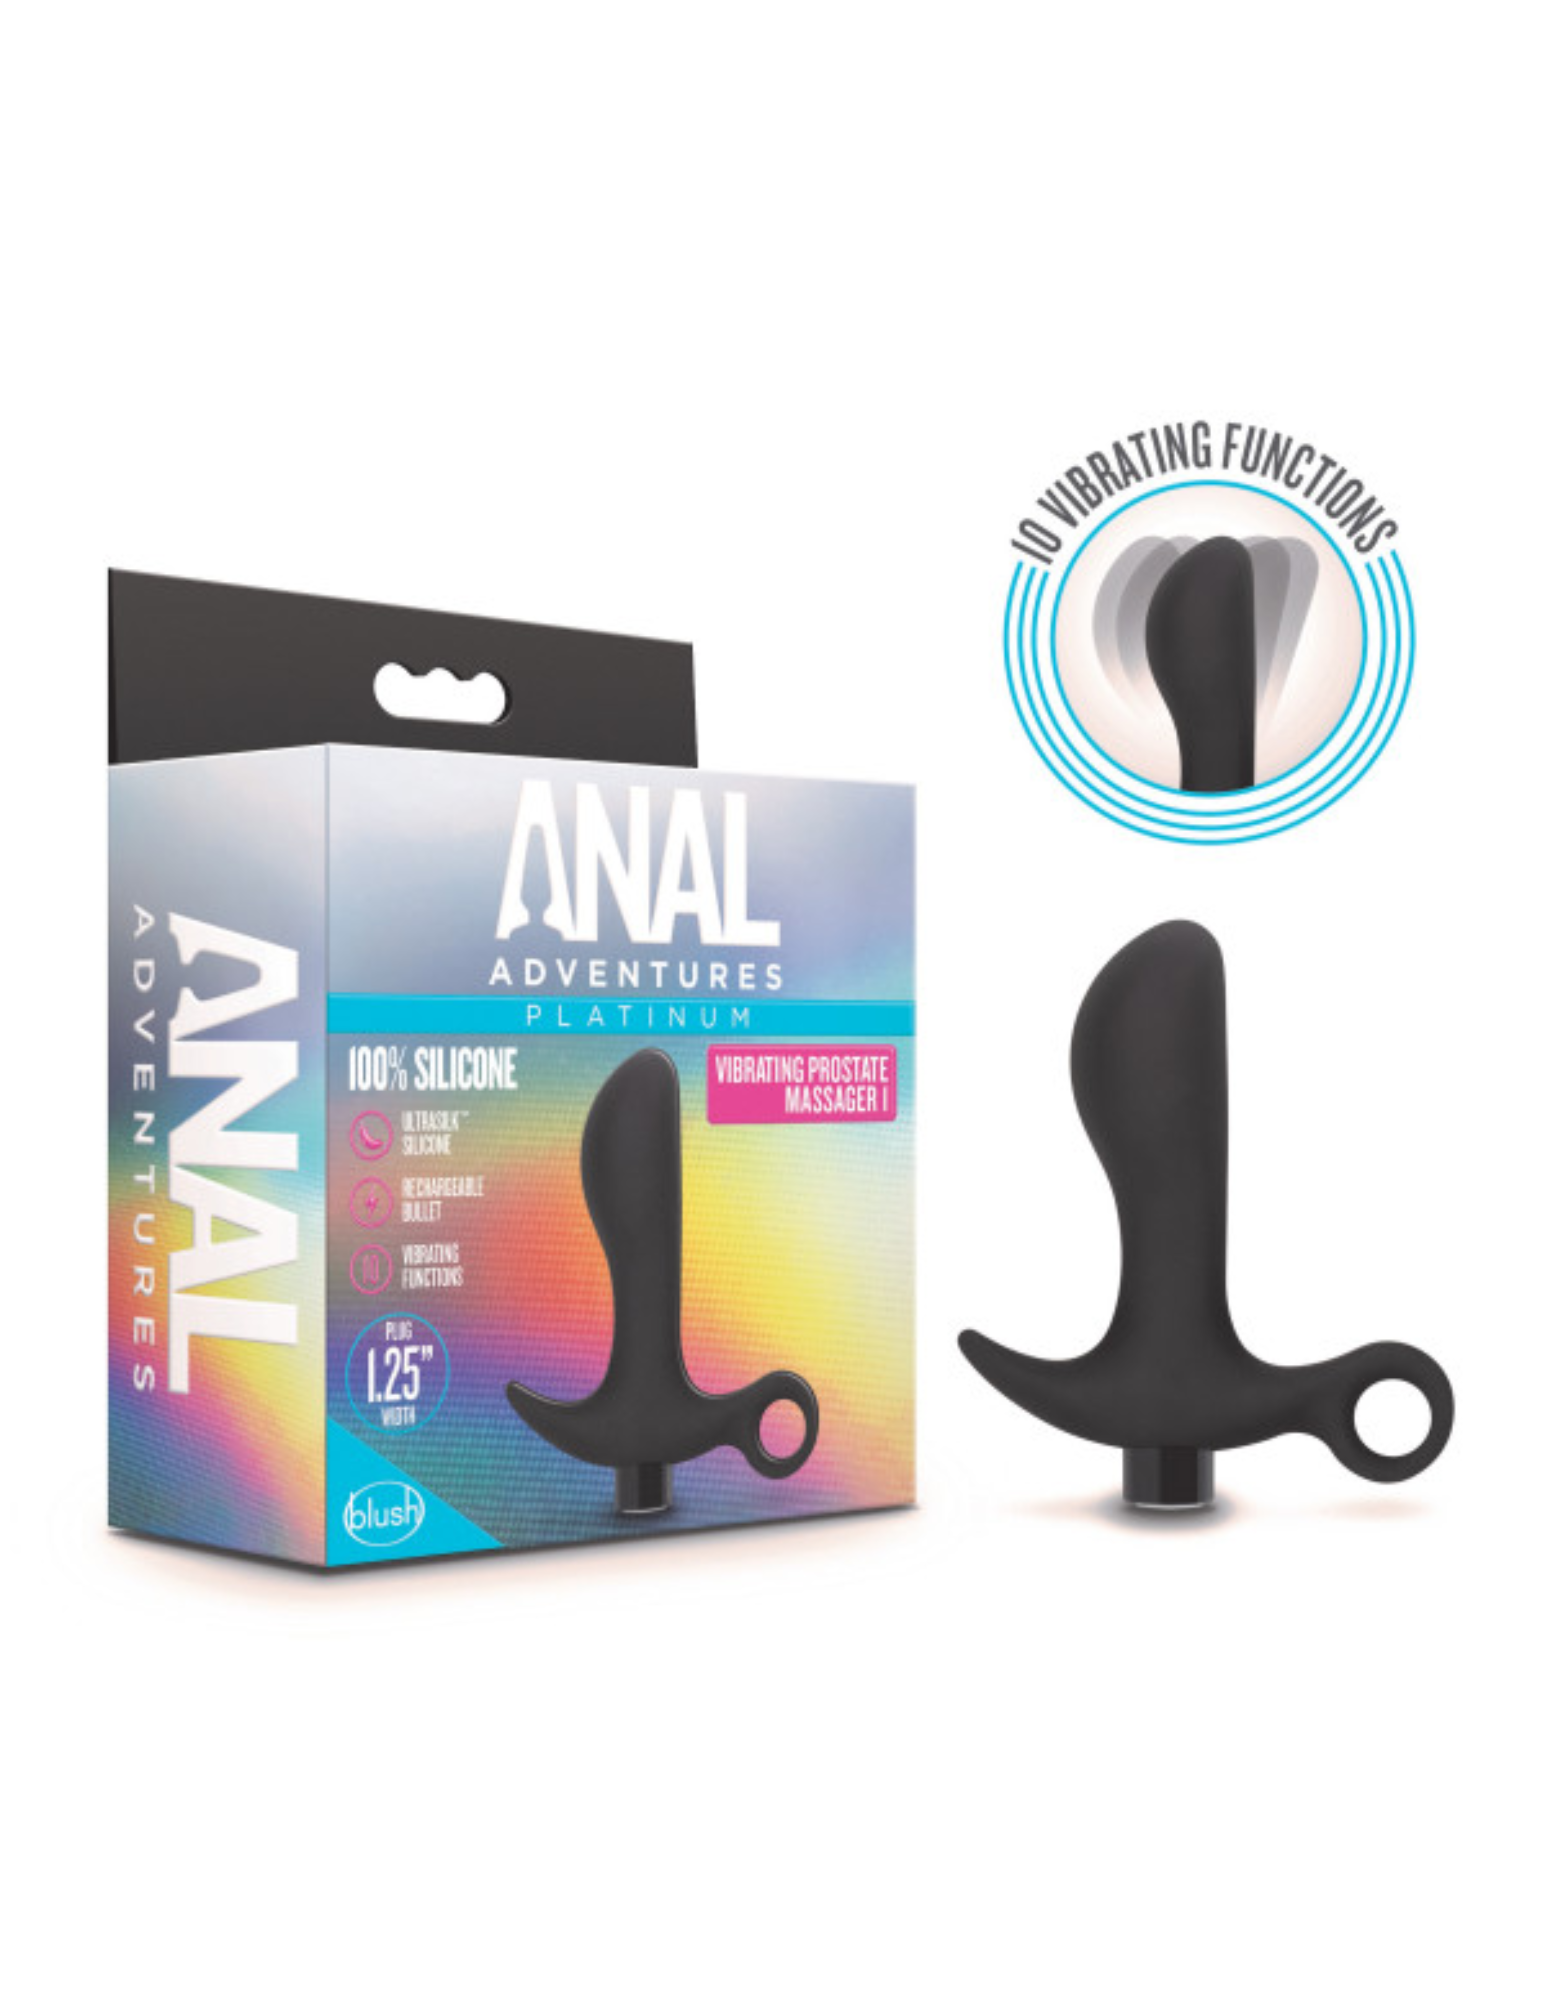 Photo shows the Anal Adventures Platinum Rechargeable Vibrating Prostate Massager from Blush box with the product next to it.